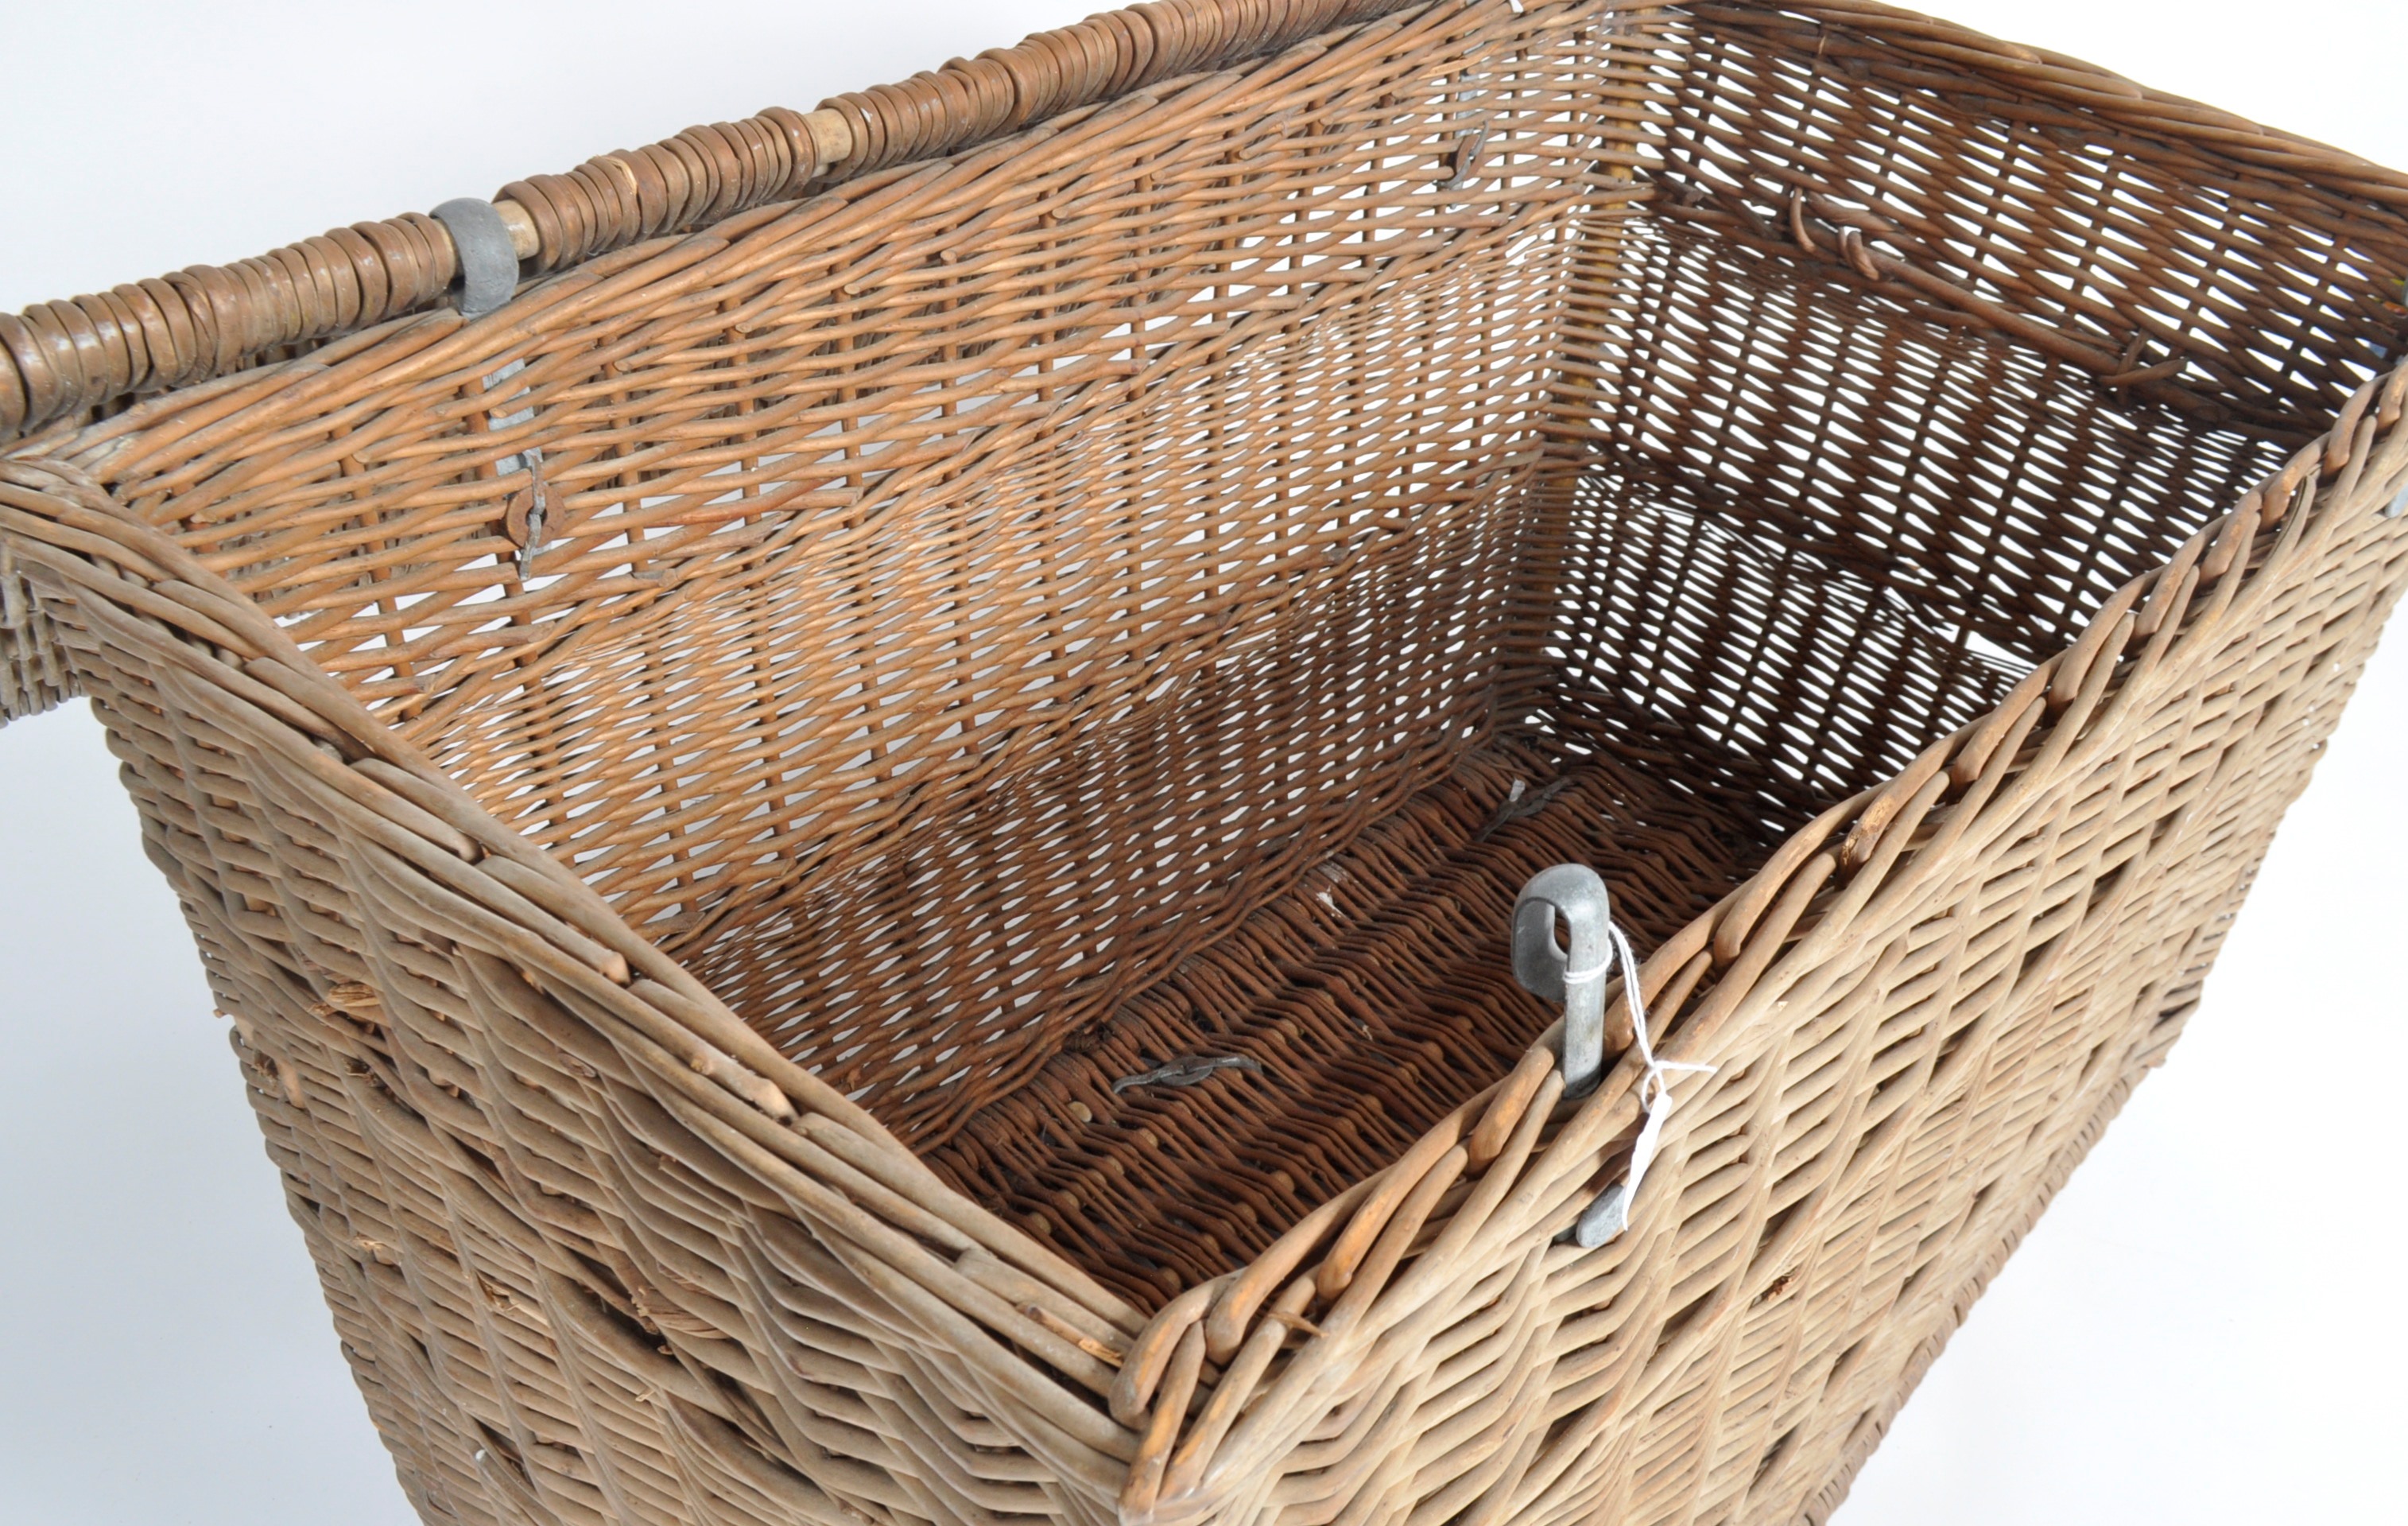 LARGE EARLY 20TH CENTURY WICKER BASKET - Image 5 of 5